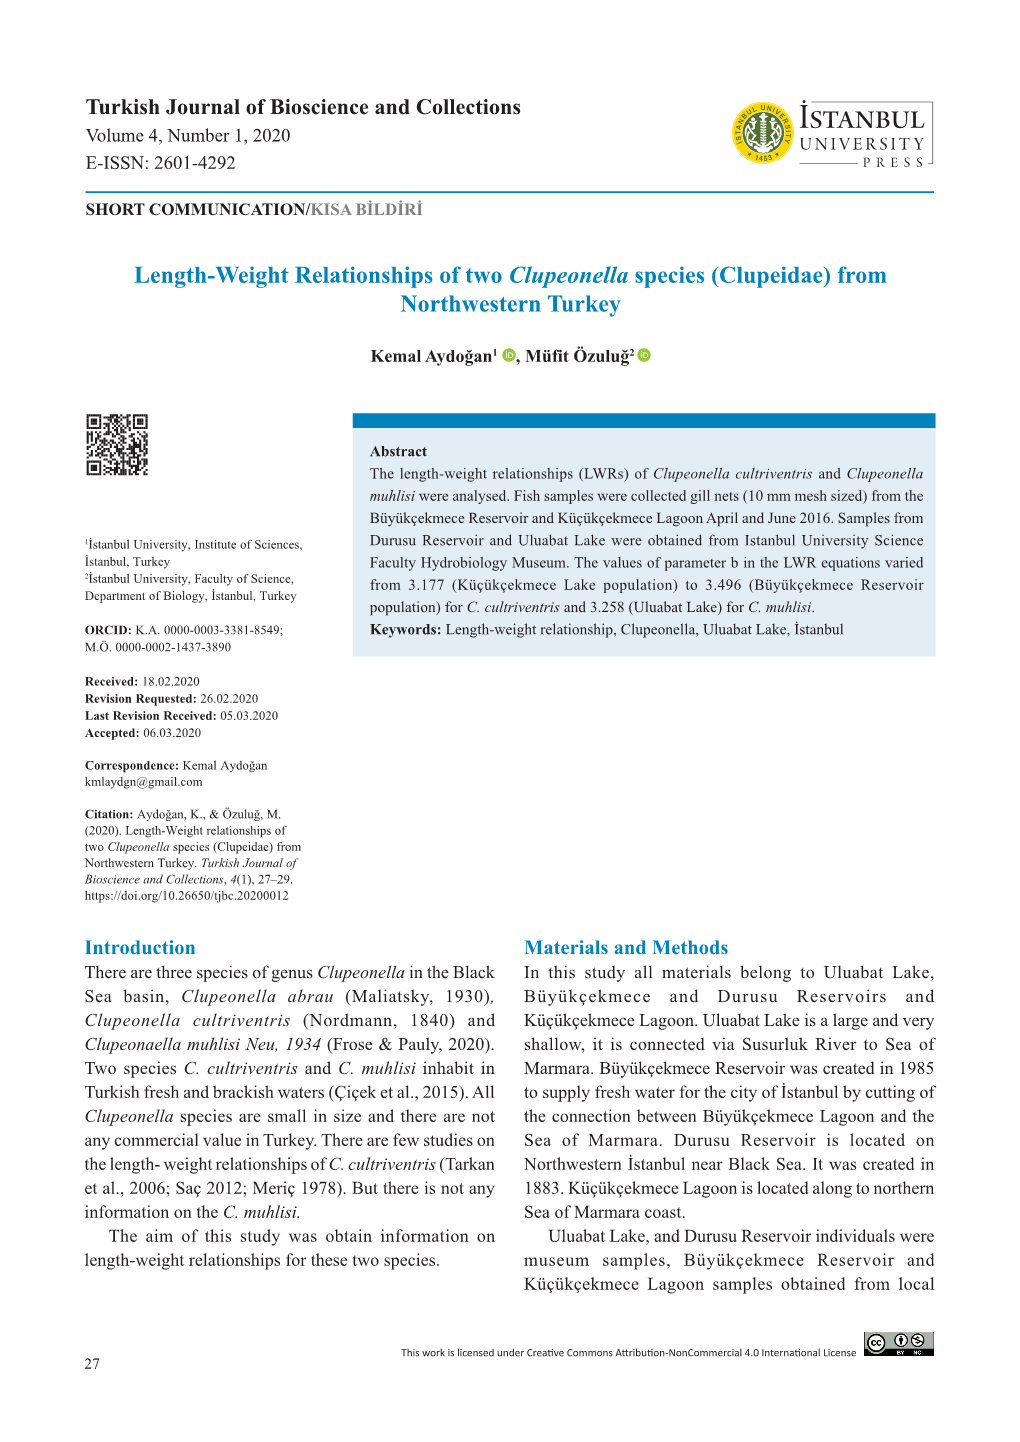 Length-Weight Relationships of Two Clupeonella Species (Clupeidae) from Northwestern Turkey